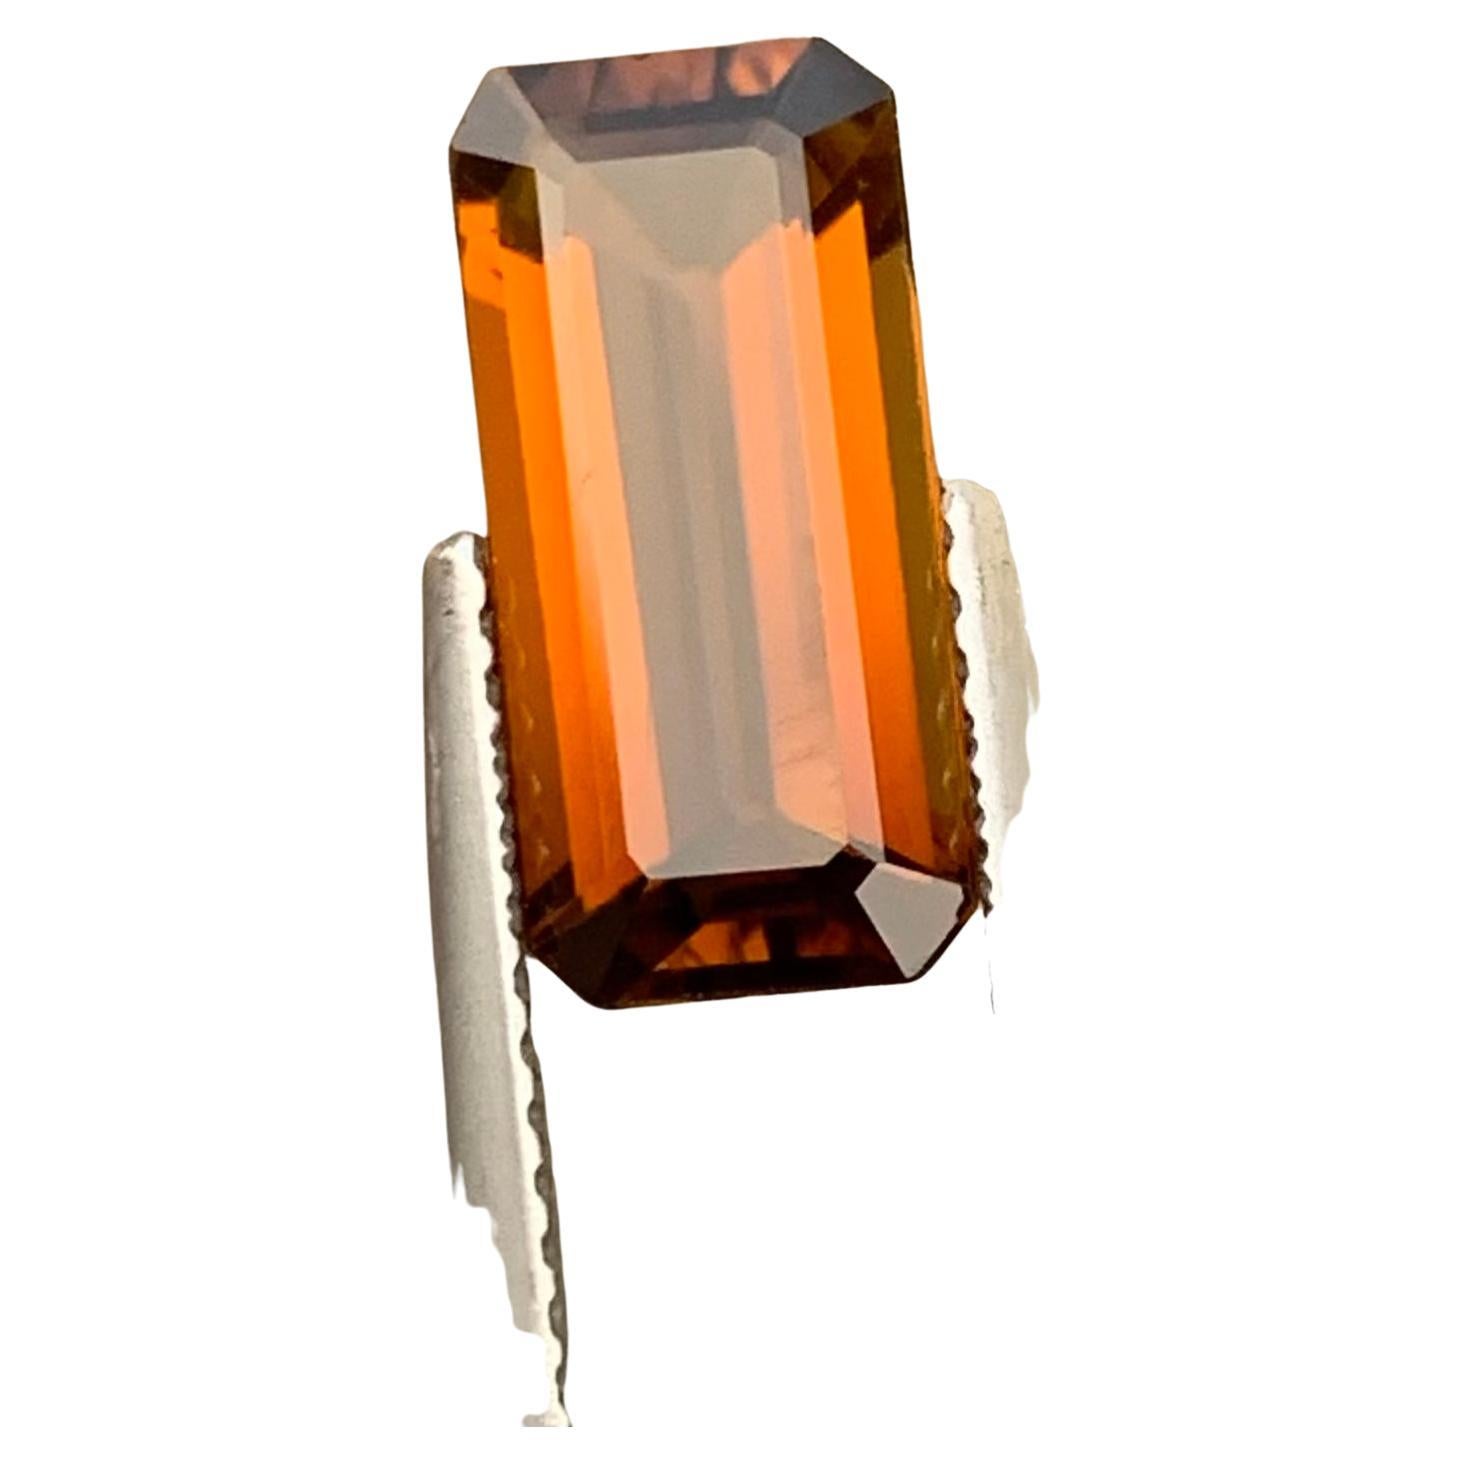 2.30 Carats Natural Faceted Tourmaline Emerald Cut From Congo Mine 